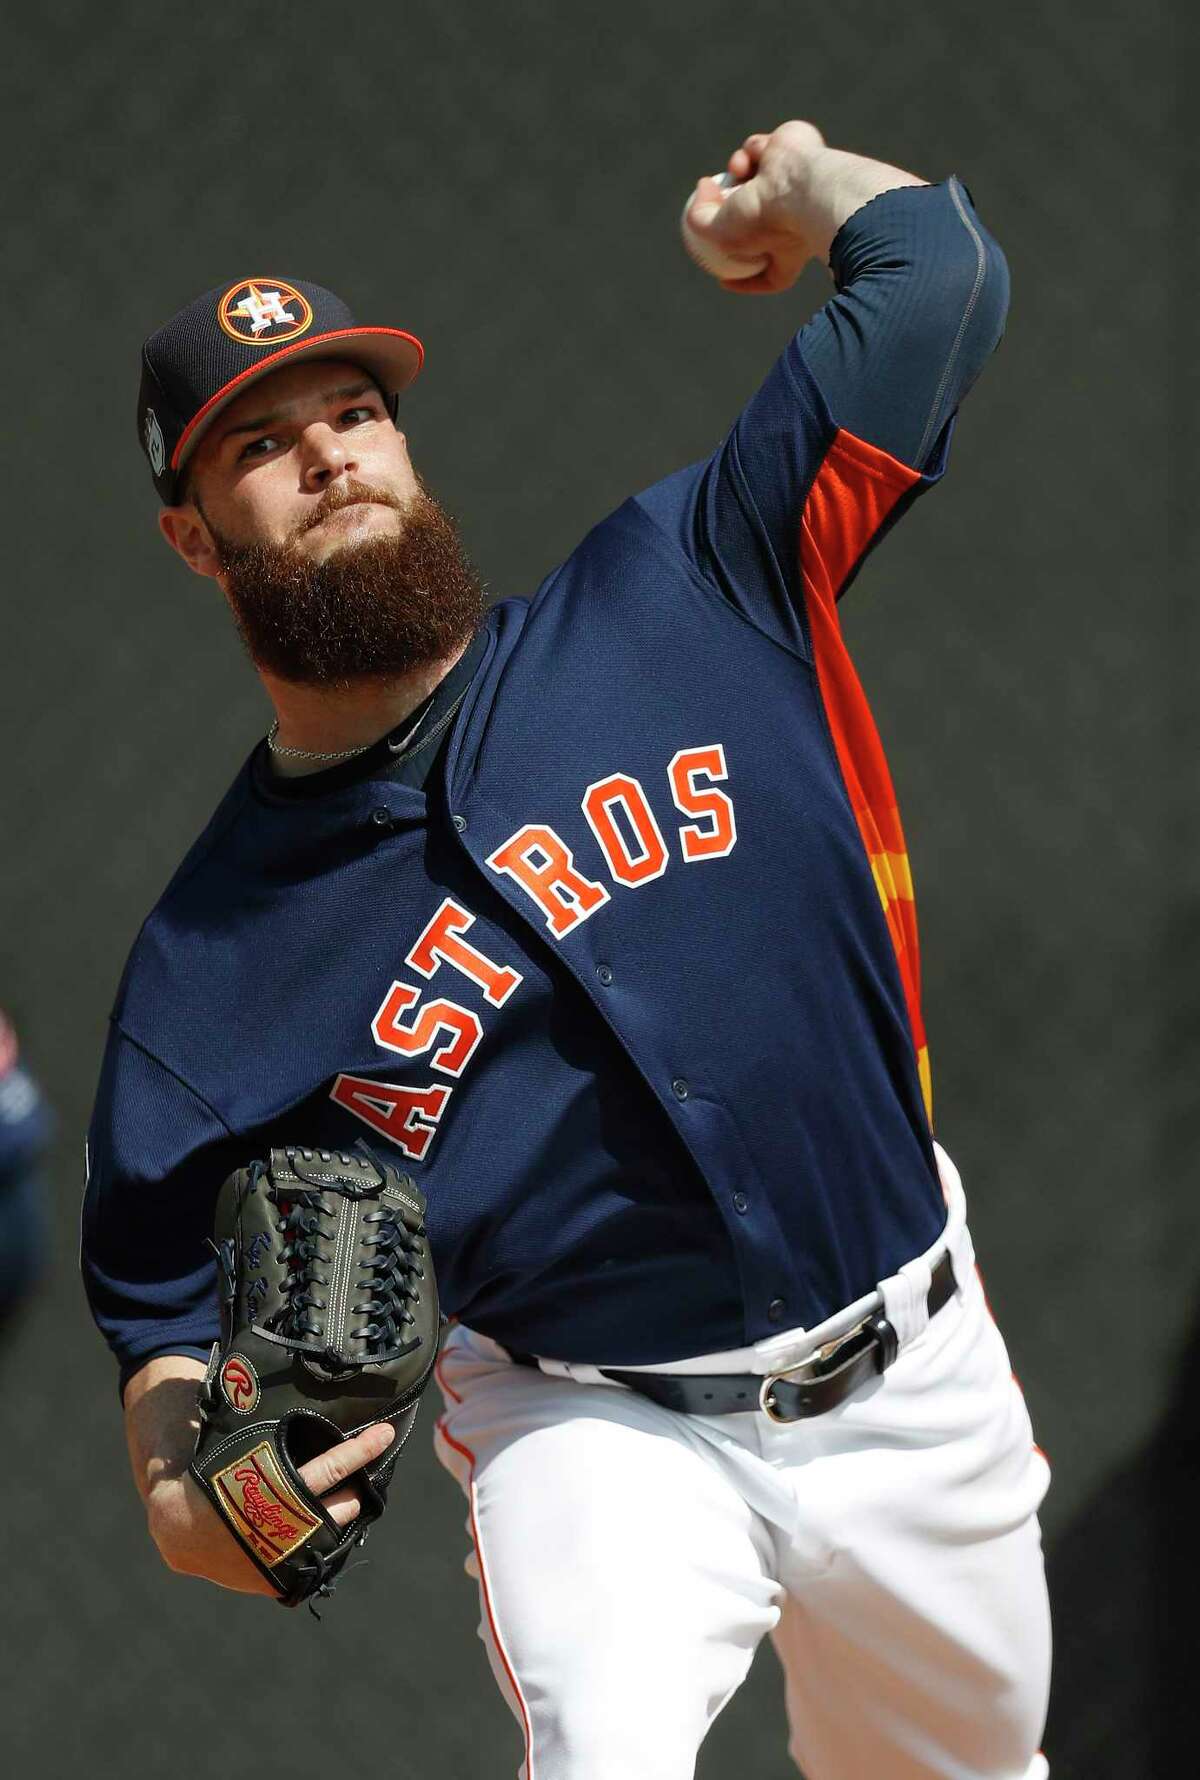 Dallas Keuchel was pleased to draw weak contact during his 39-pitch outing in Tuesday's simulated game in West Palm Beach, Fla.